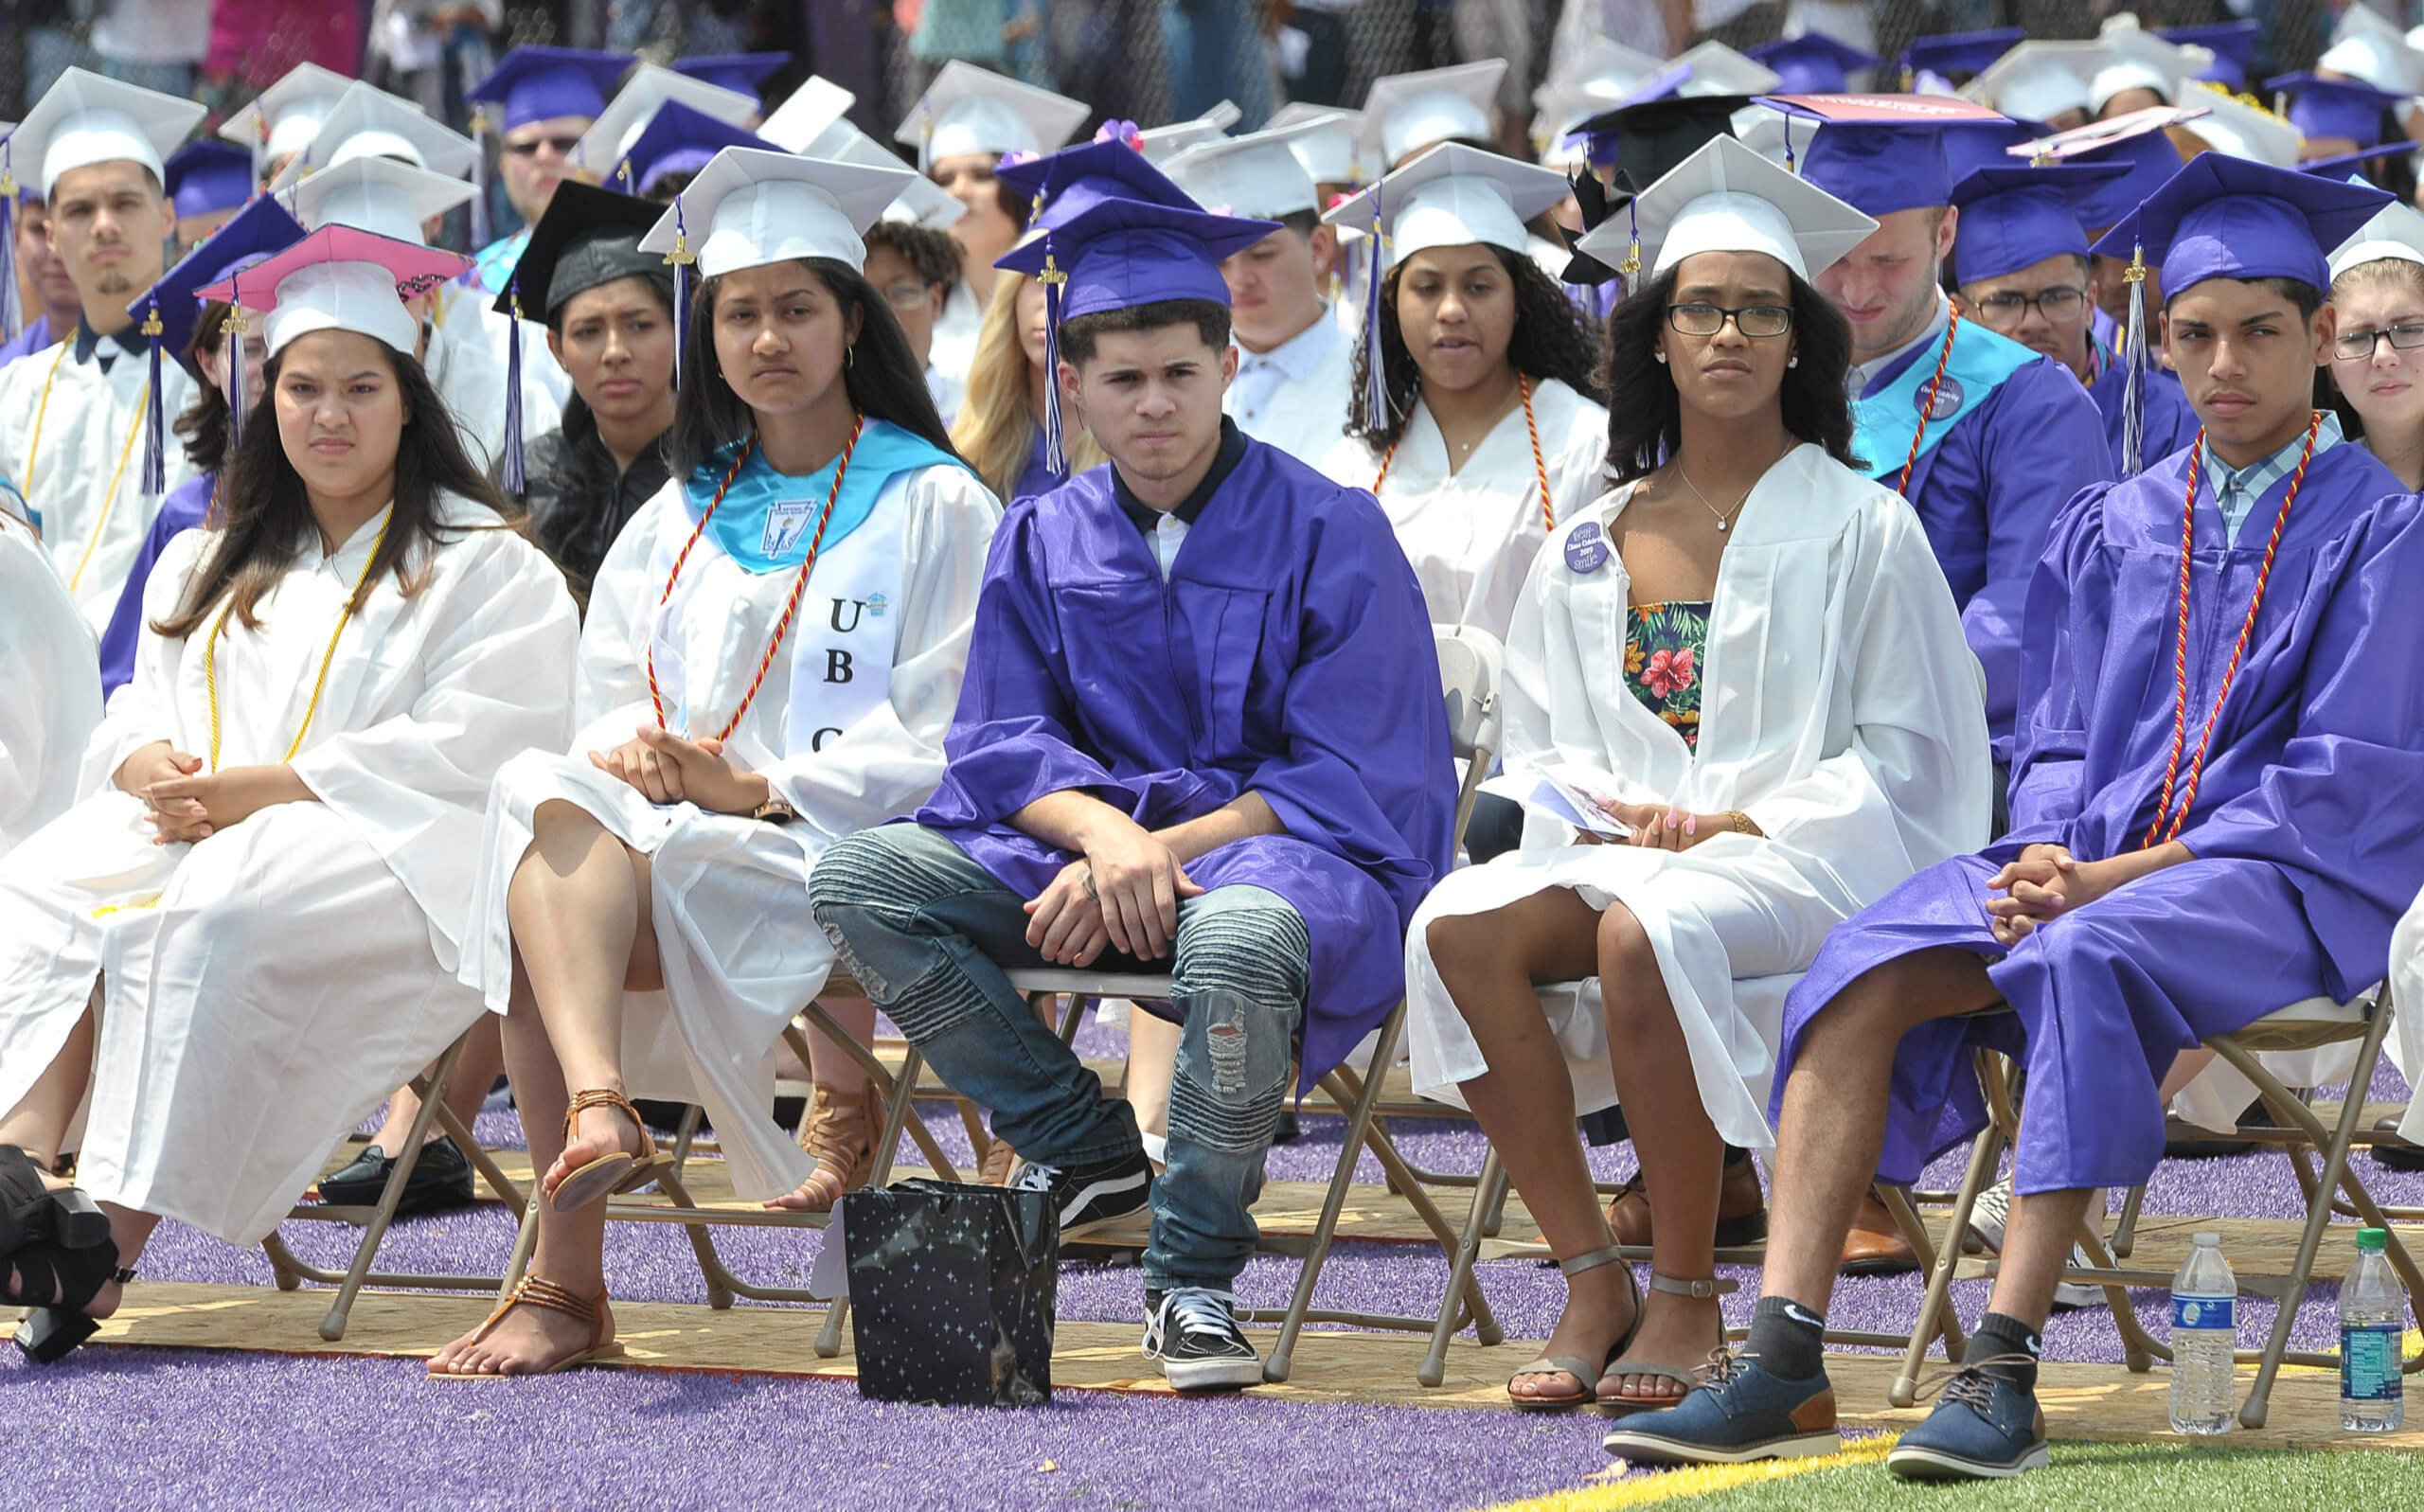 Students dressed in their cap and gown at graduation.